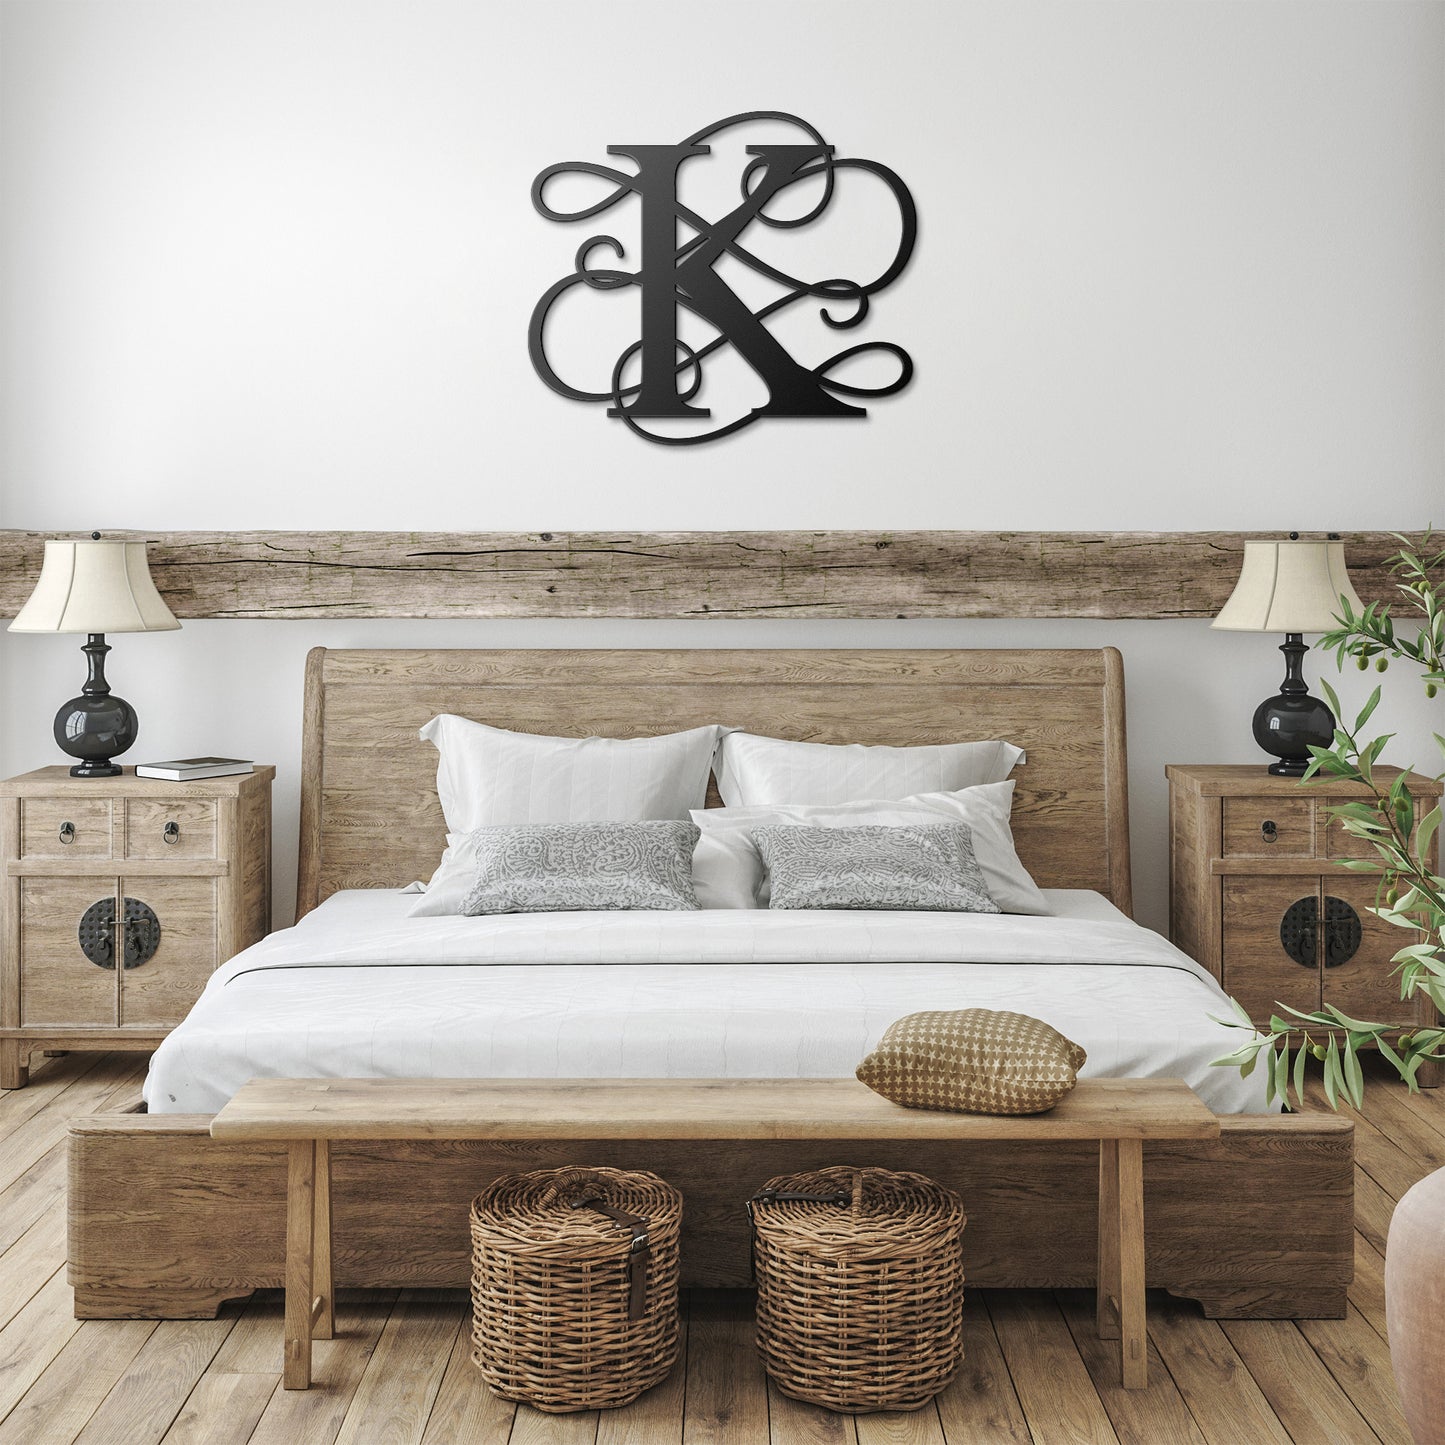 Letter K, Your Initial, Swirl Letters, Monogram, Metal Signs, Rustic Sign, Wall Art, Wall Decor